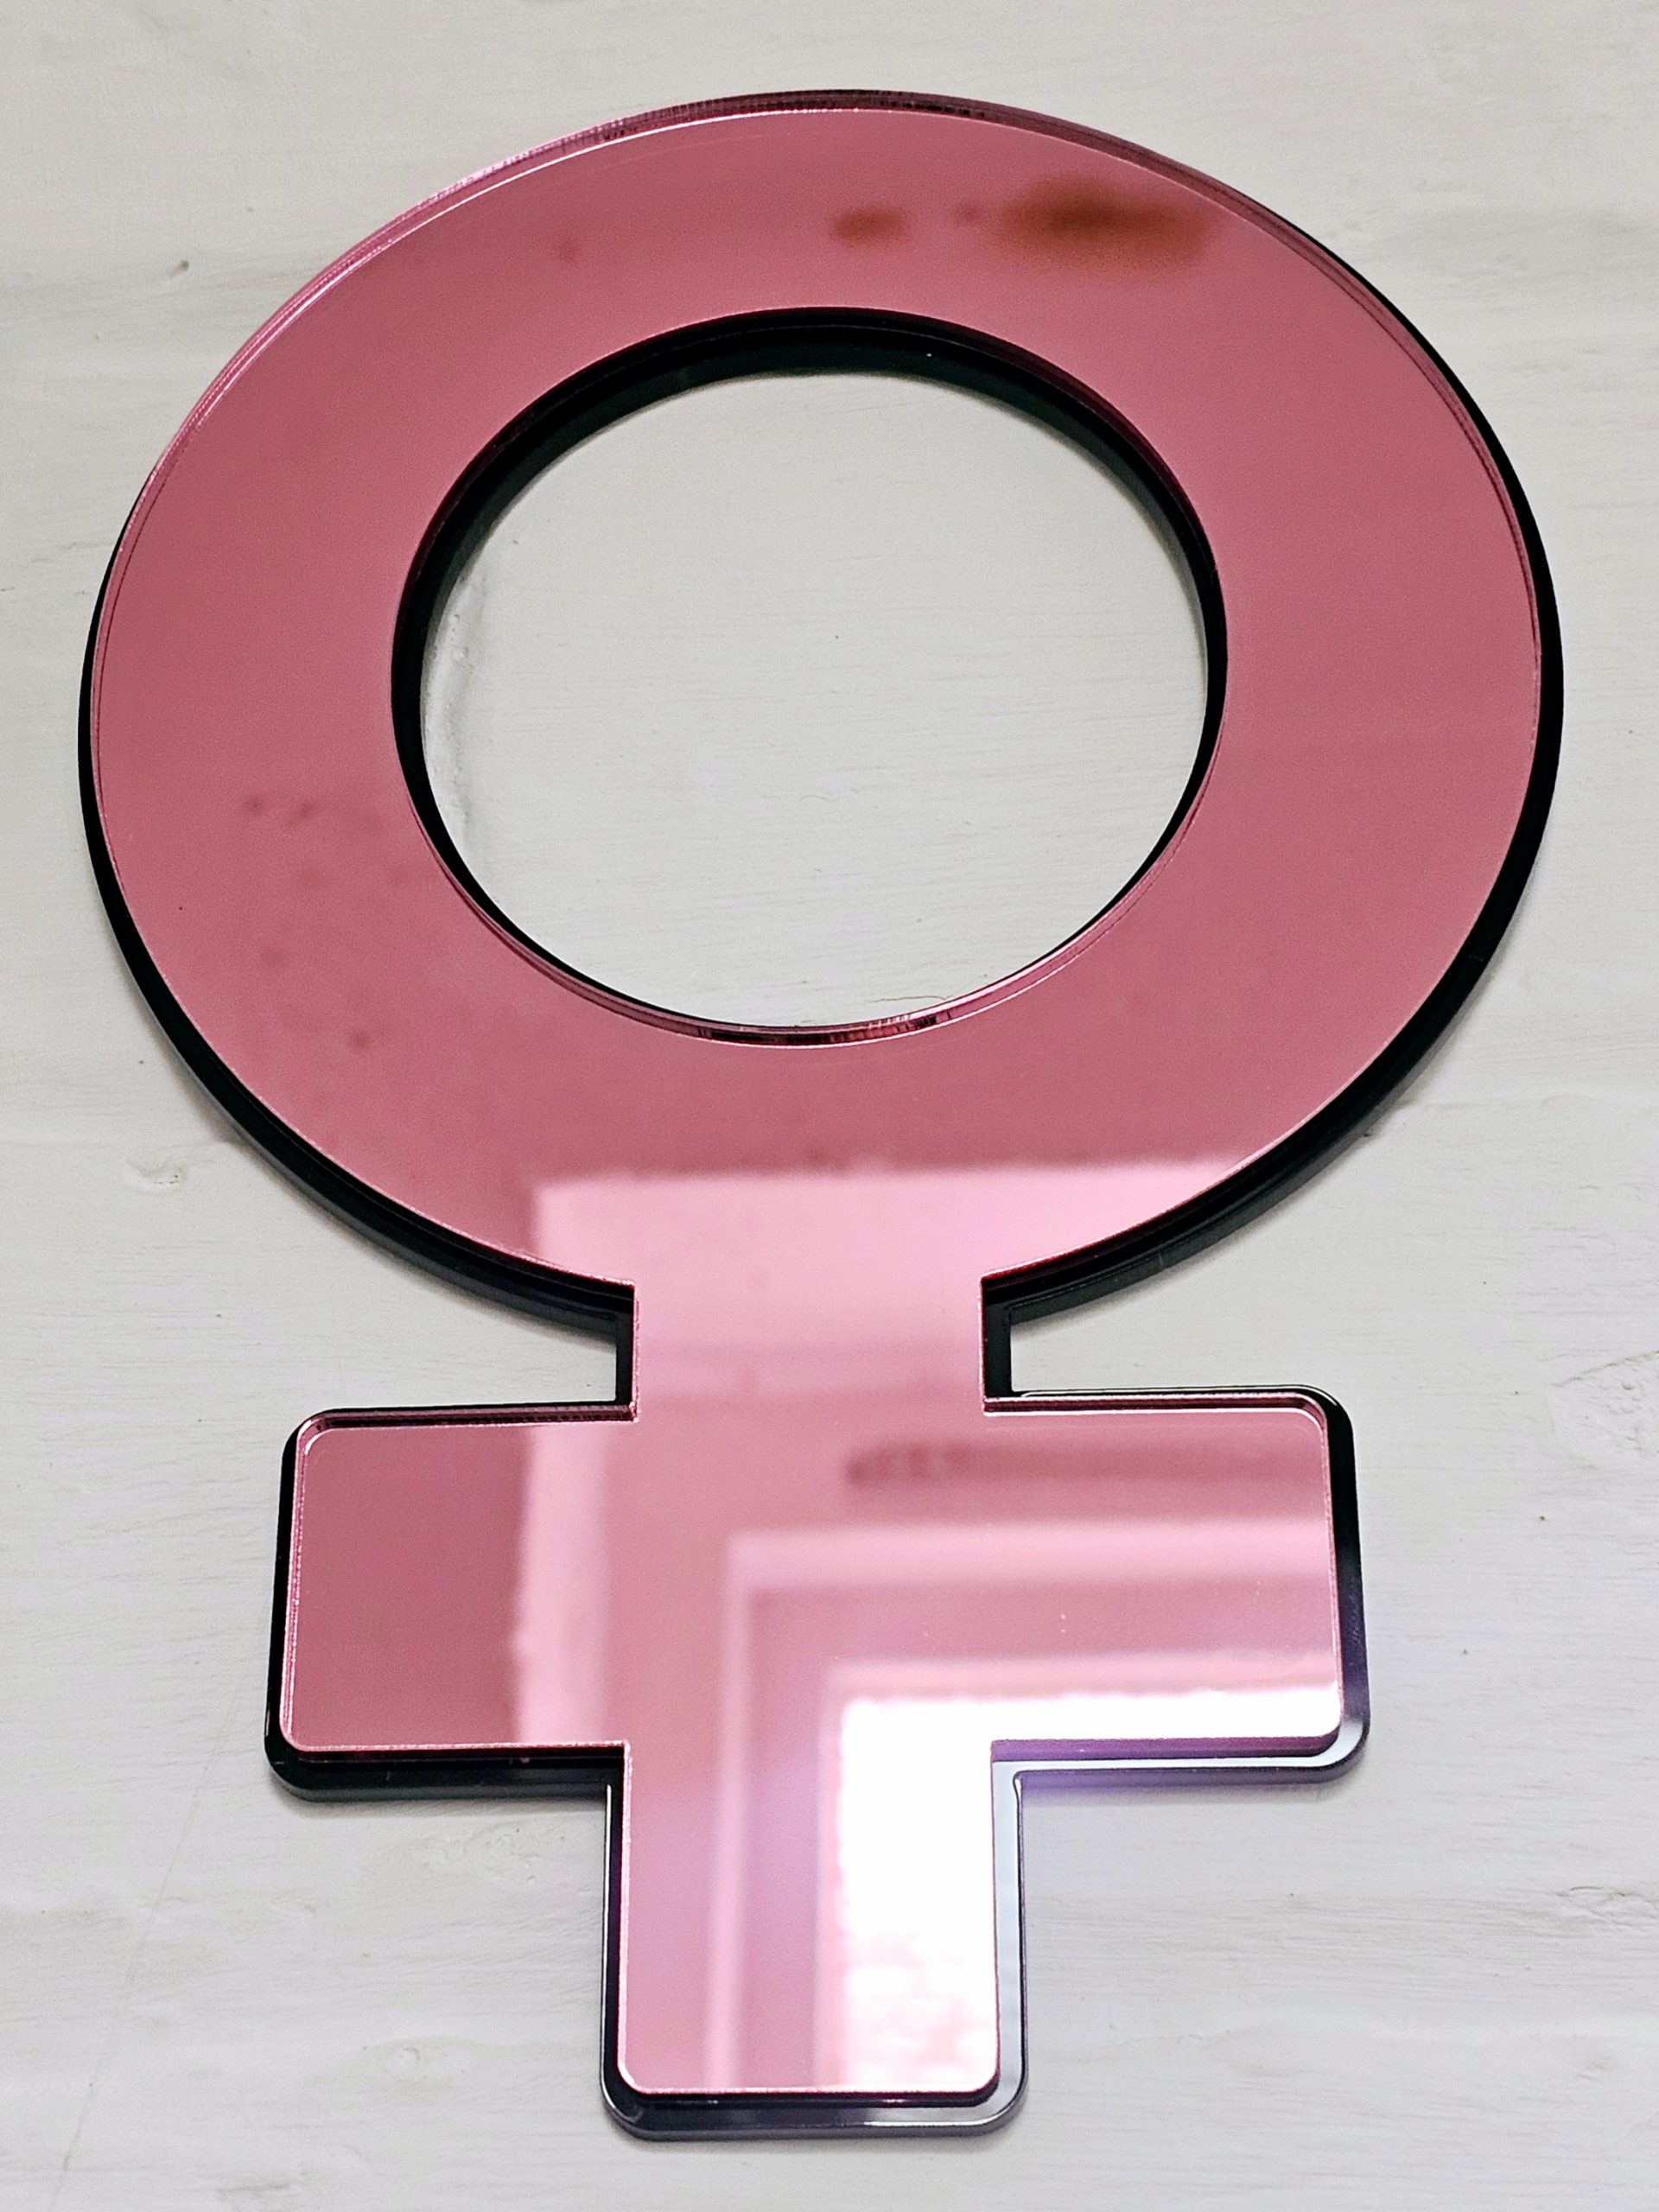 The female symbol made from pink mirror with a black backing. Mounted on a white brick wall.